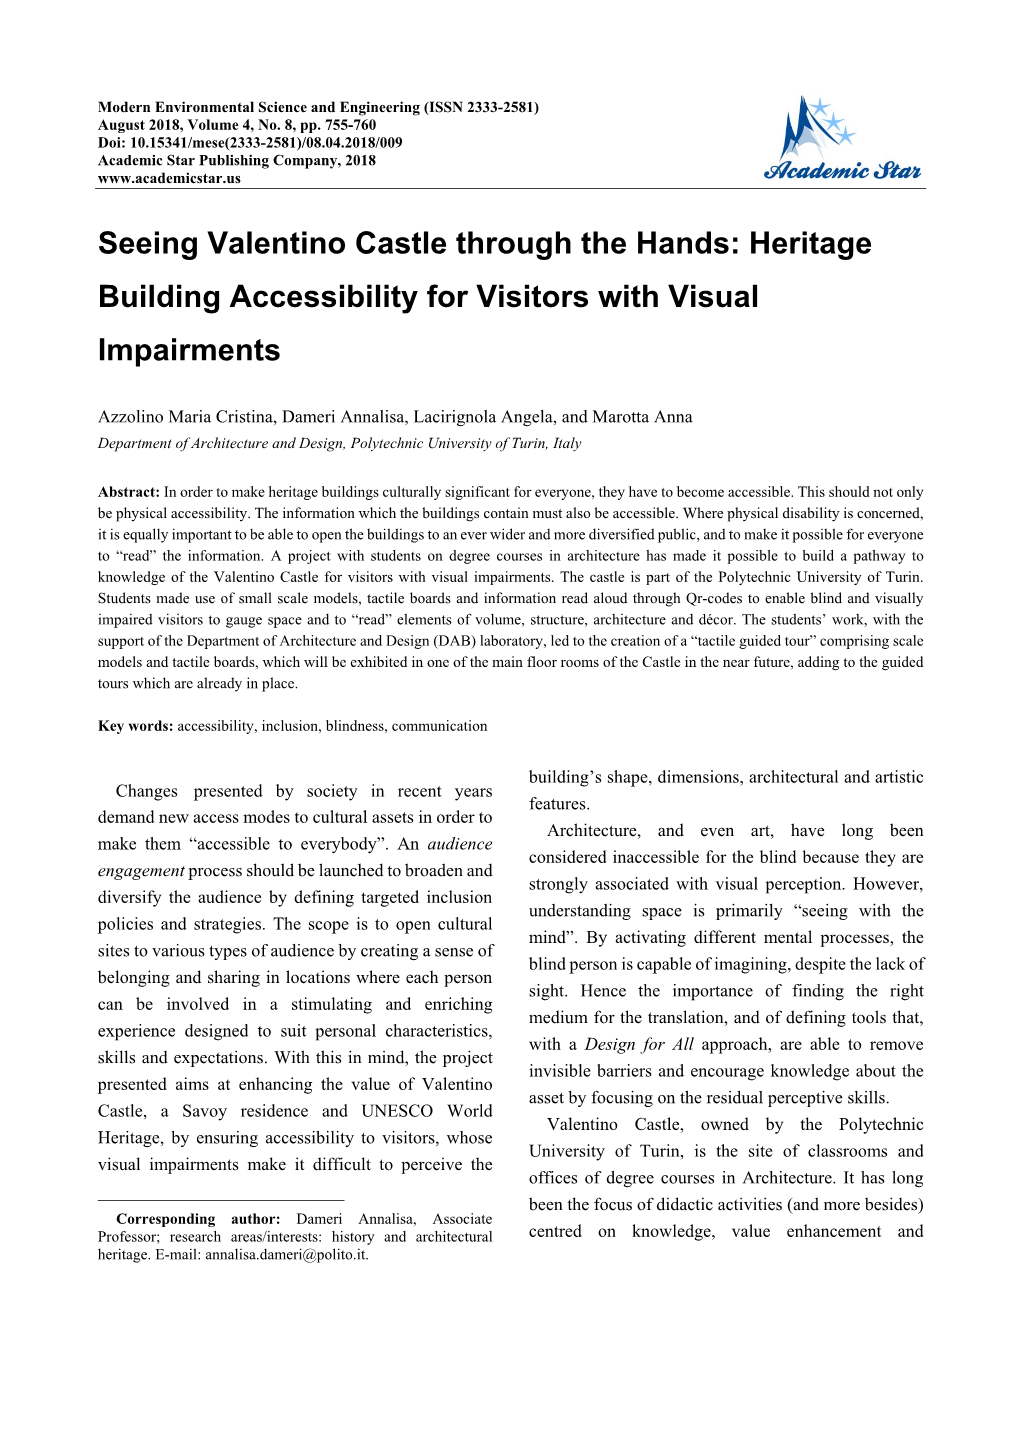 Seeing Valentino Castle Through the Hands: Heritage Building Accessibility for Visitors with Visual Impairments